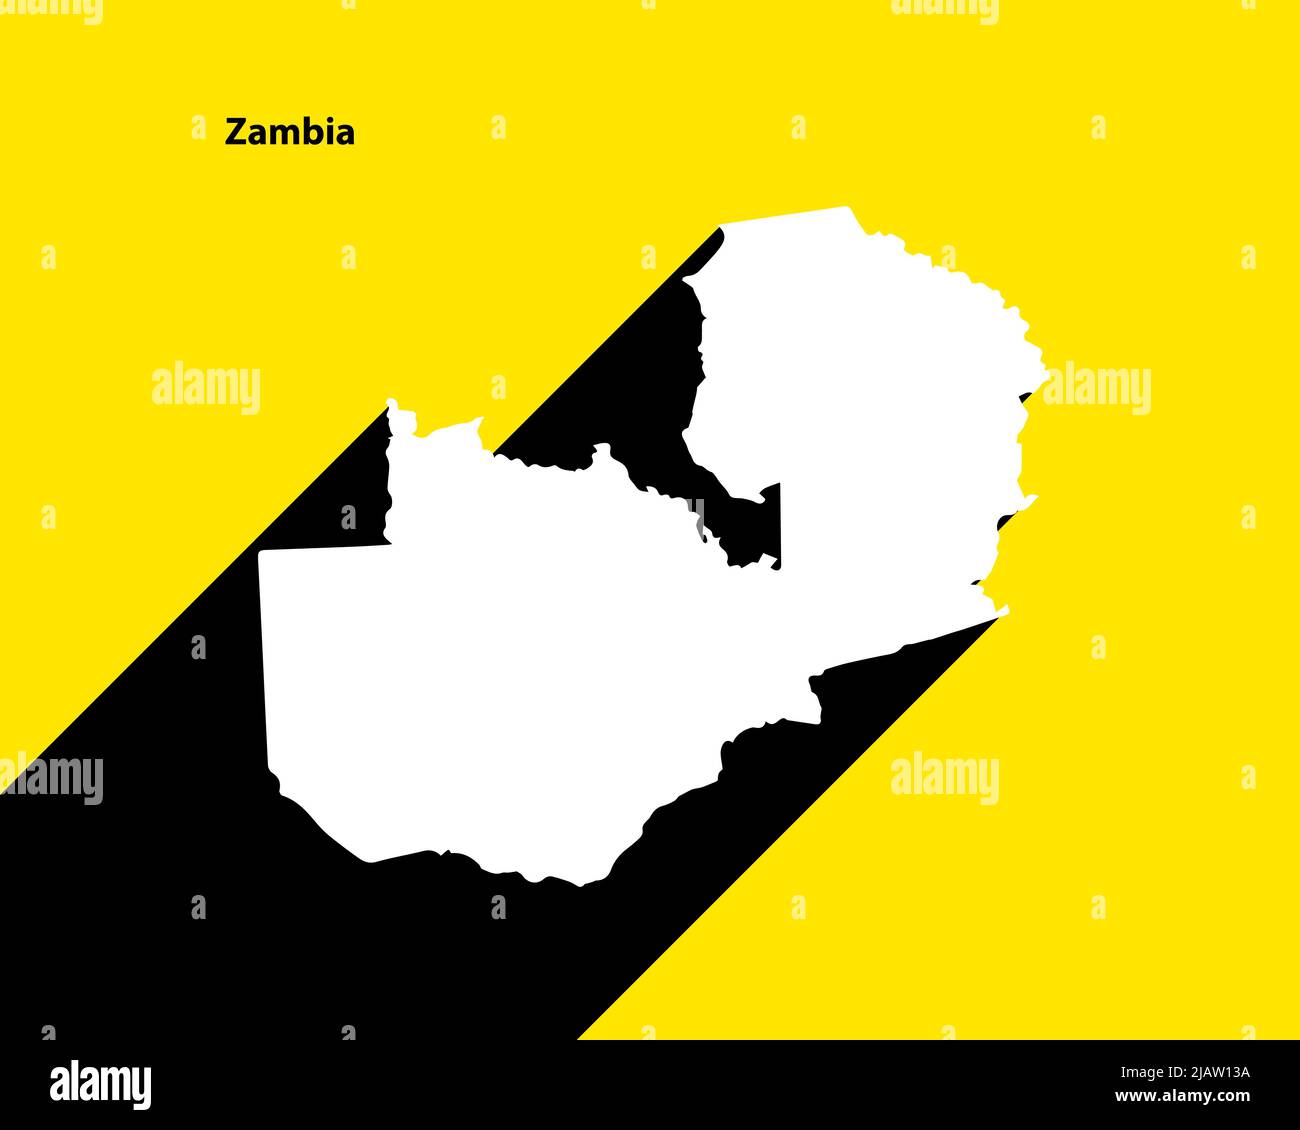 Zambia Map on retro poster with long shadow. Vintage sign easy to edit, manipulate, resize or colourise. Stock Vector